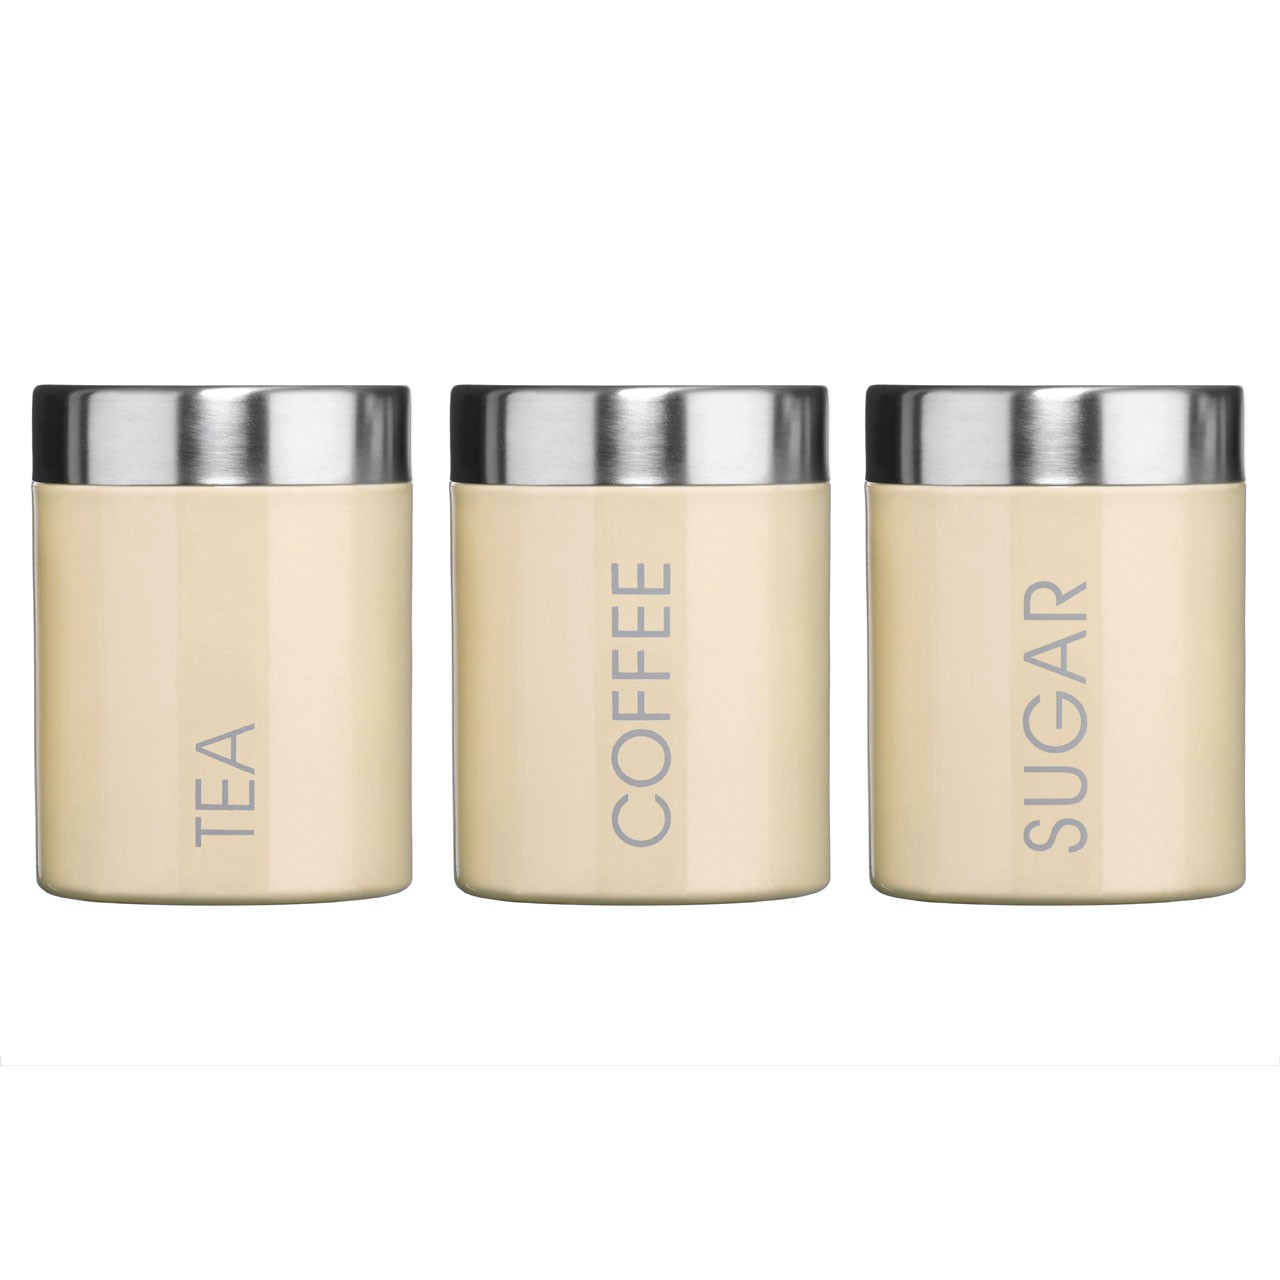 Liberty Tea, Coffee and Sugar Canisters - Cream, Set of 3